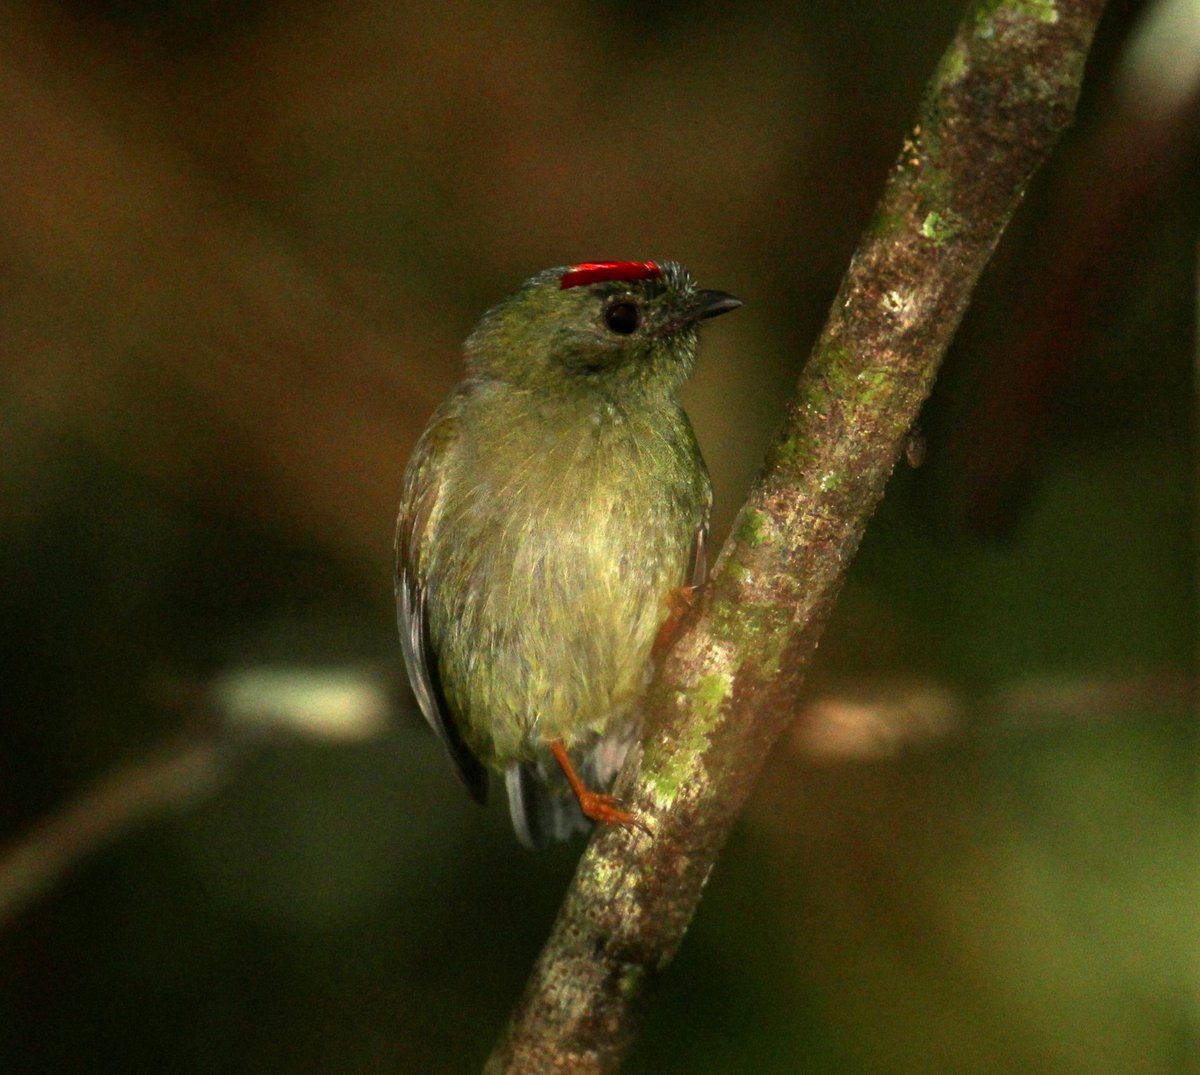 Excited to talk today at #Evol2023 about how life history strategies of birds may impact estimates of past demographic history in the Brazilian Atlantic Forest. If you’re interested in birds, phylogeography and modeling, feel free to stop by Mesilla 235 at 4:30p today.